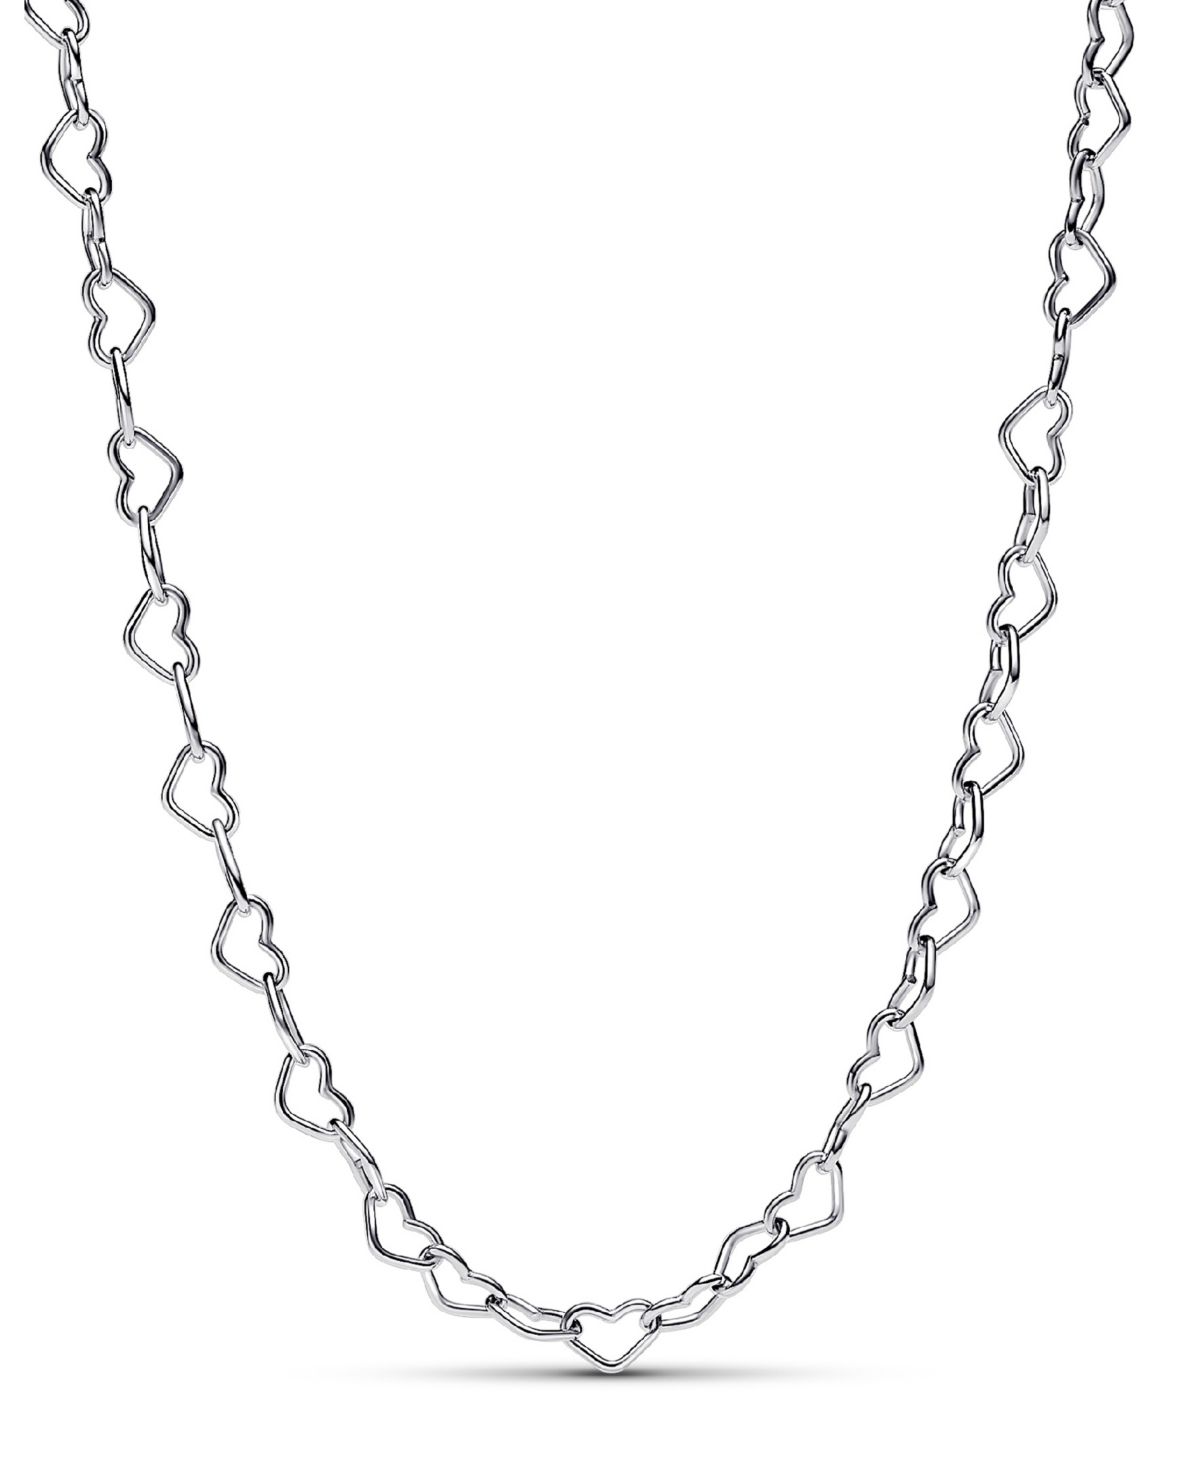 sterling silver Linked Hearts Collier 17.7 inch Necklace - Silver